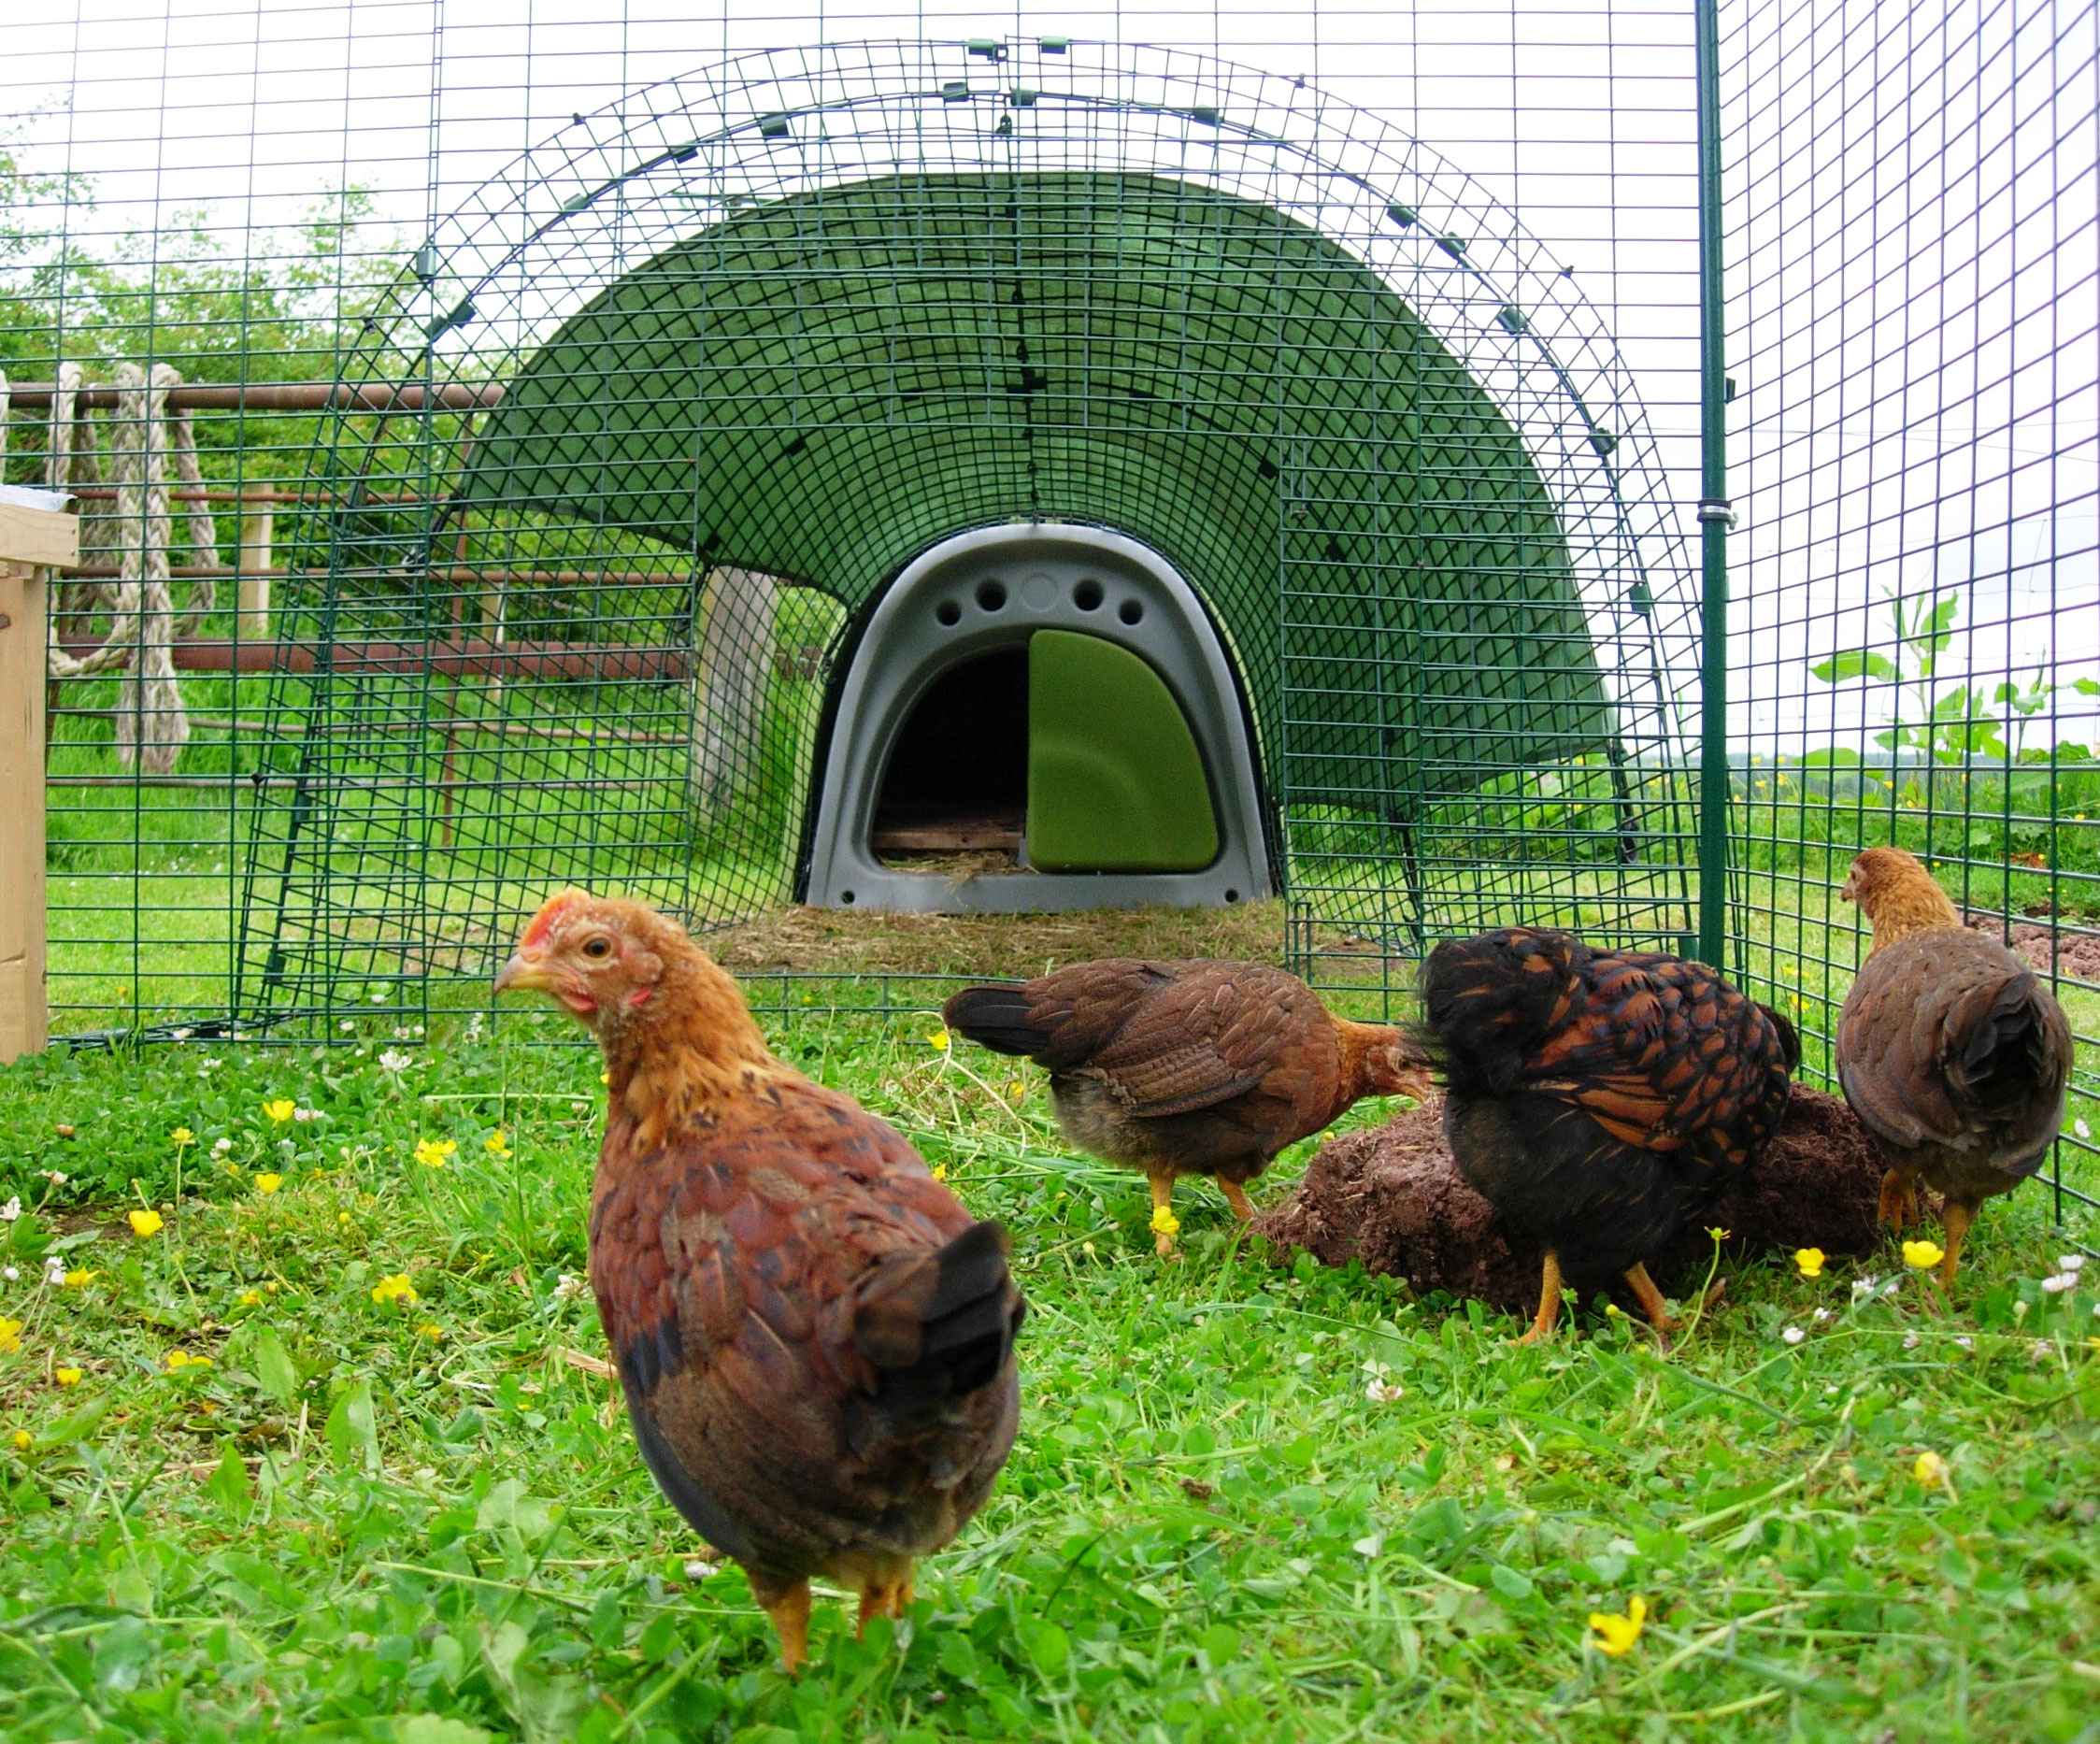 Jilly Graham's hens love being let out to explore the garden but know they need to go back in at night